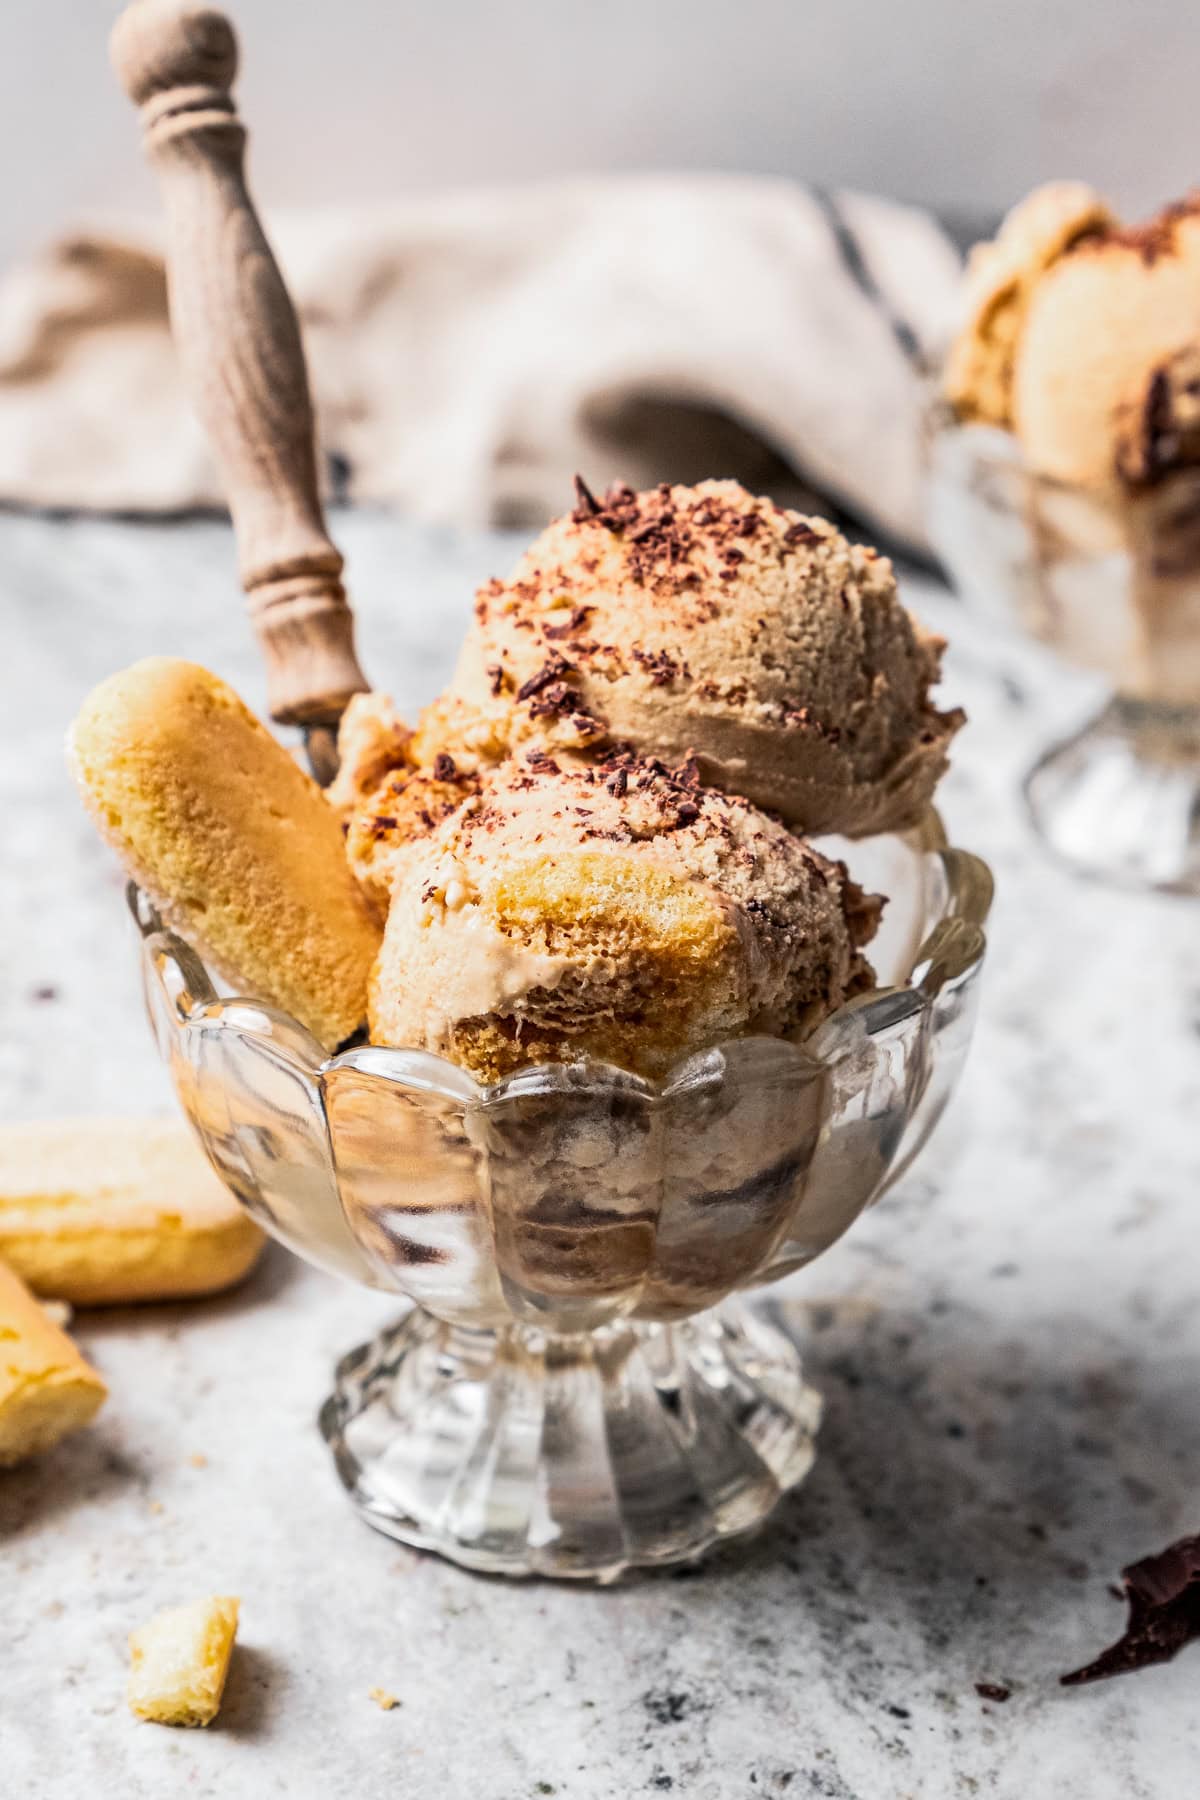 Scoops of tiramisu ice cream in glass bowls, next to scattered ladyfinger cookies and chopped chocolate.